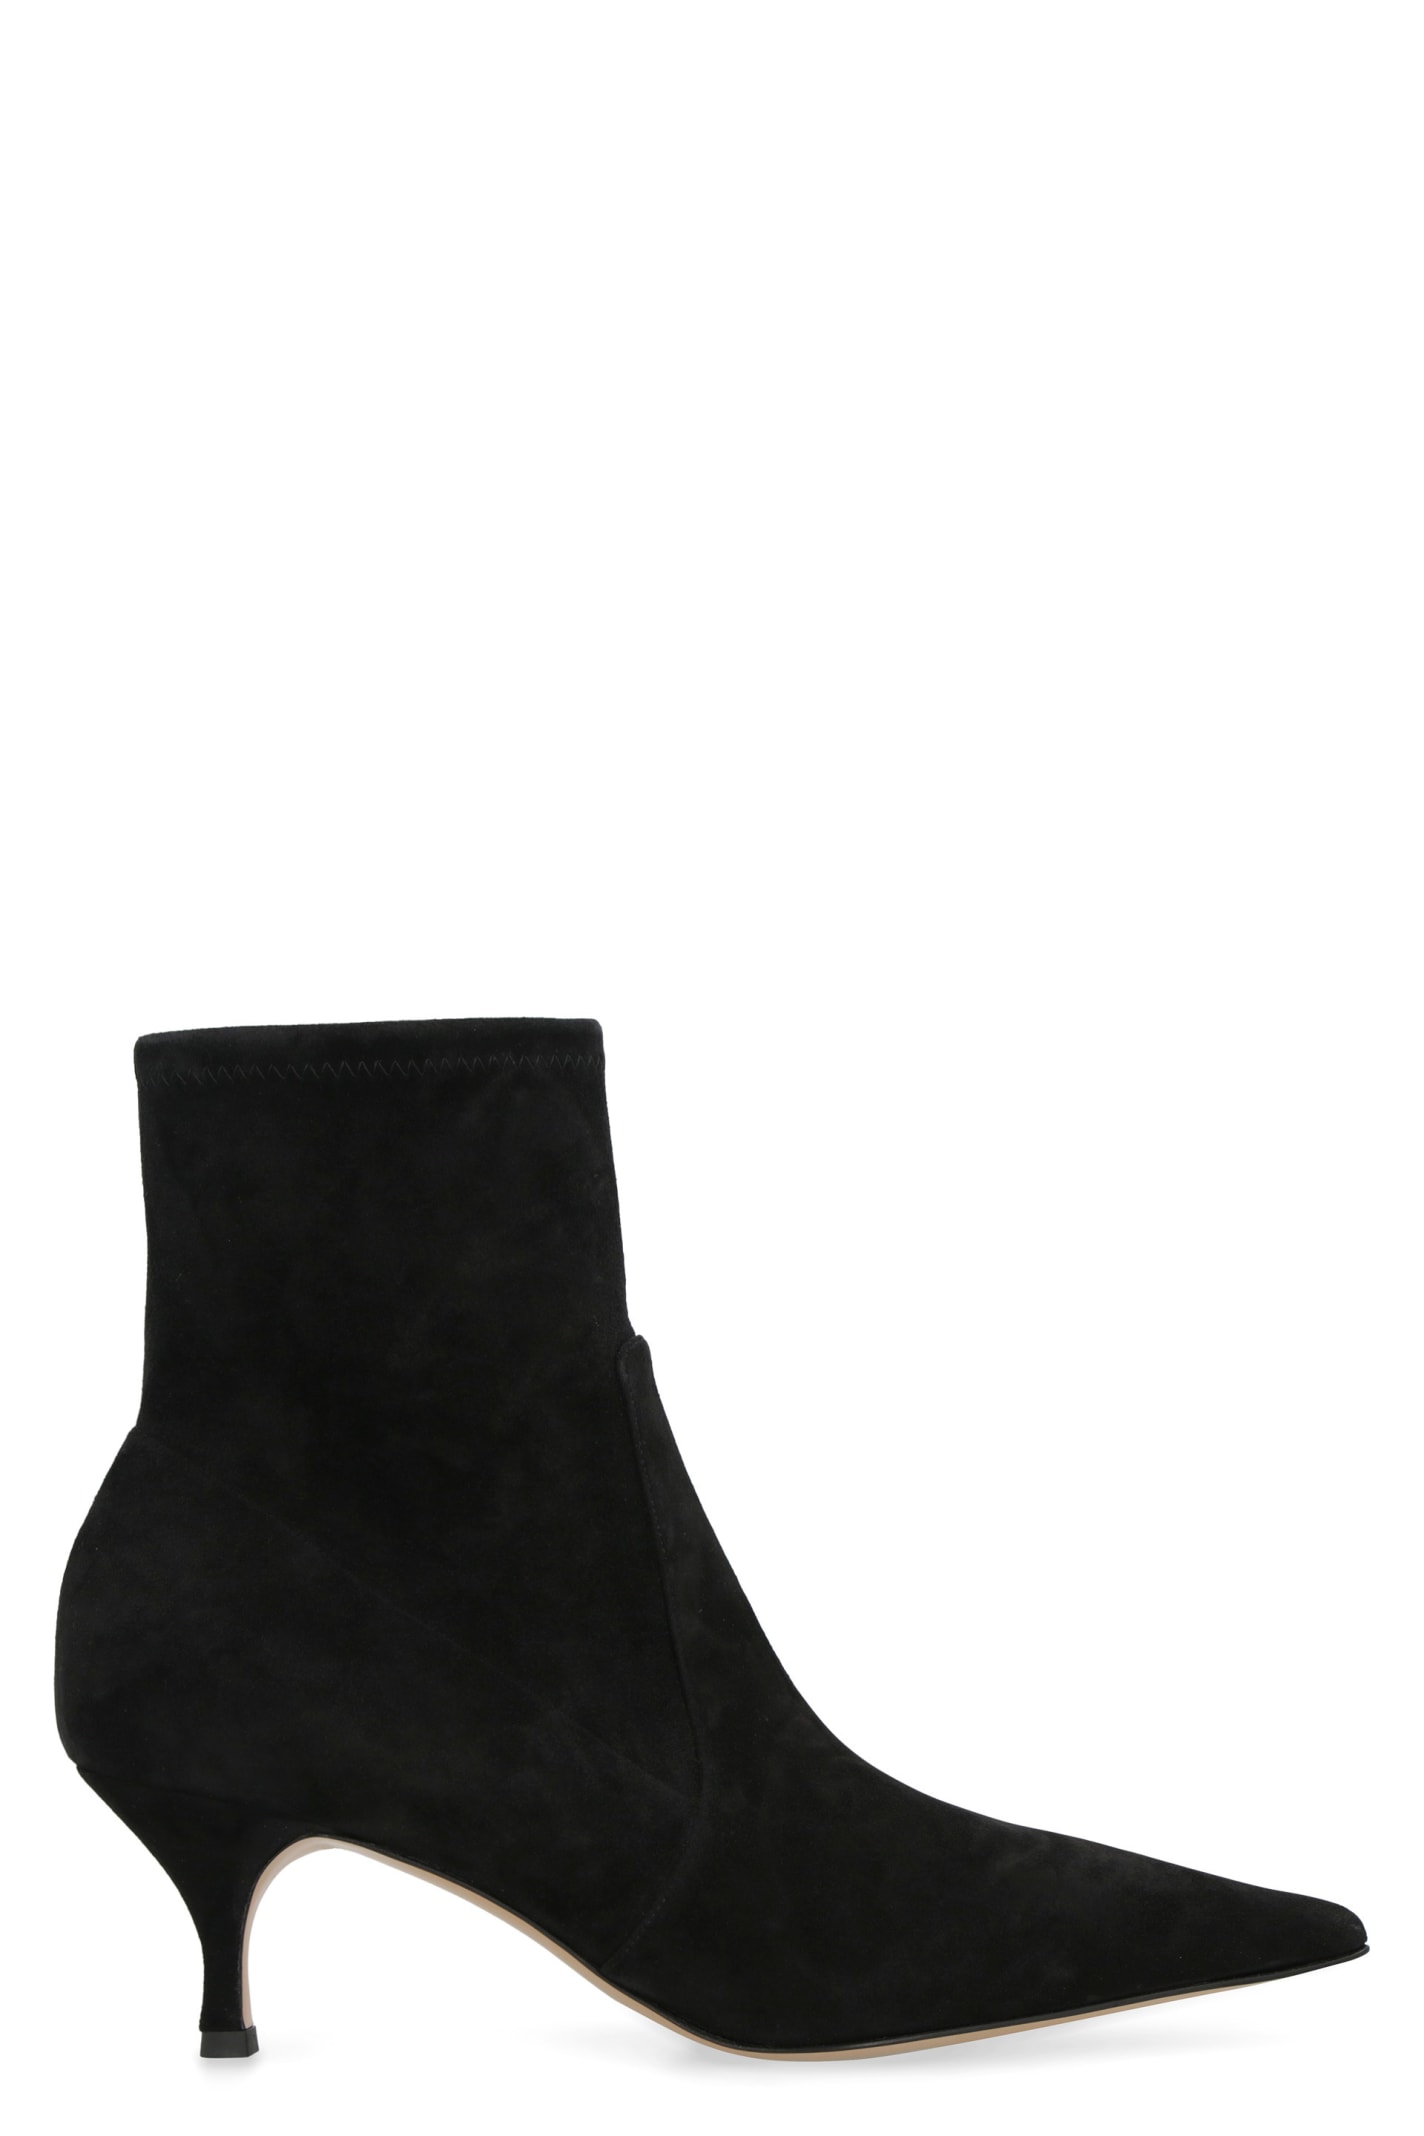 CASADEI SUEDE ANKLE BOOTS